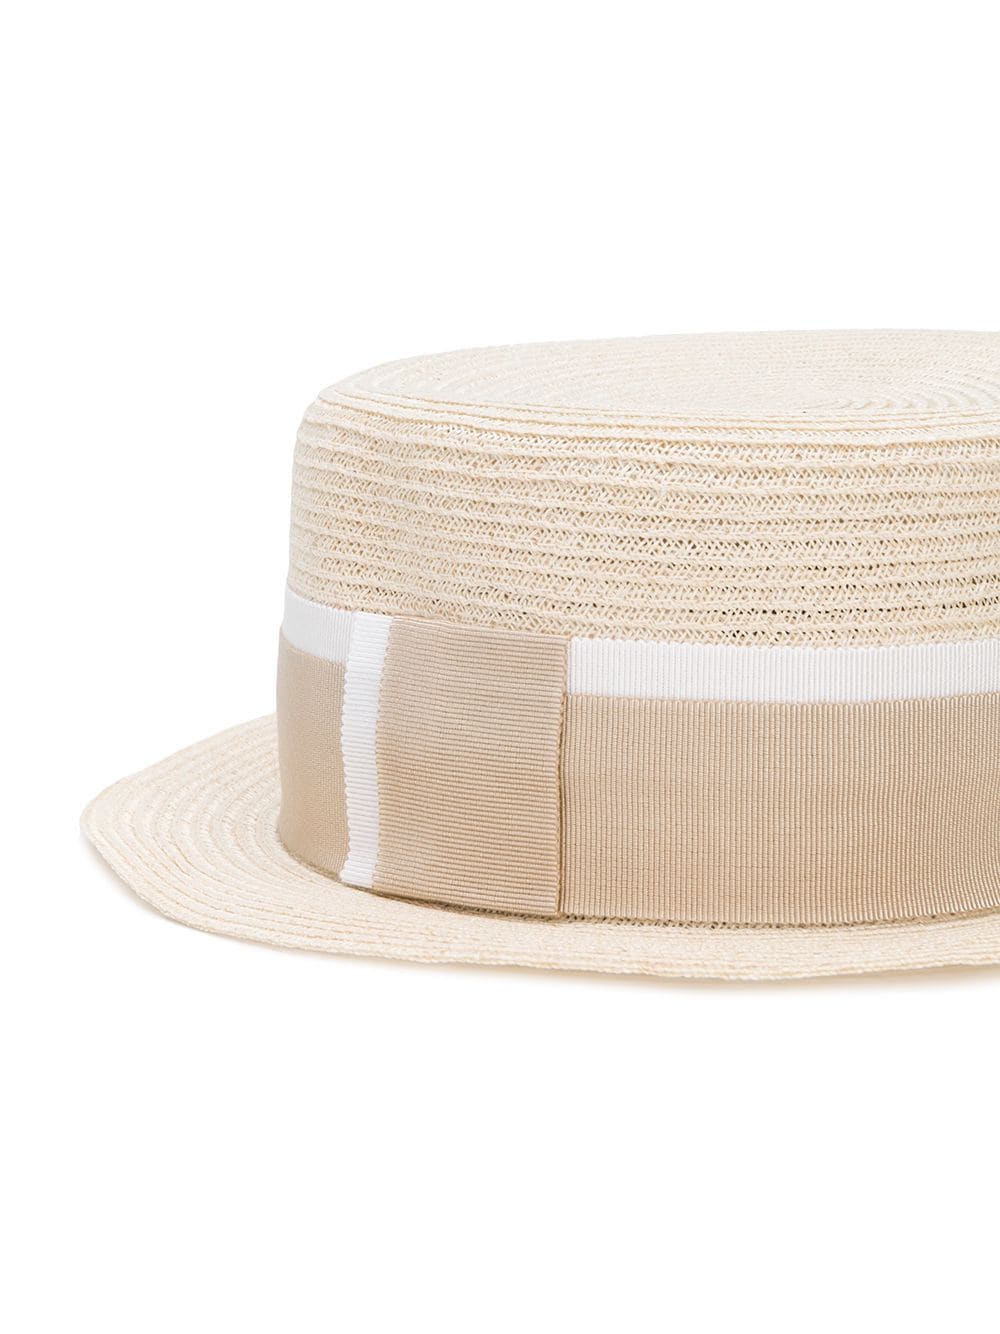 Shop Maison Michel Auguste hat with Express Delivery - FARFETCH